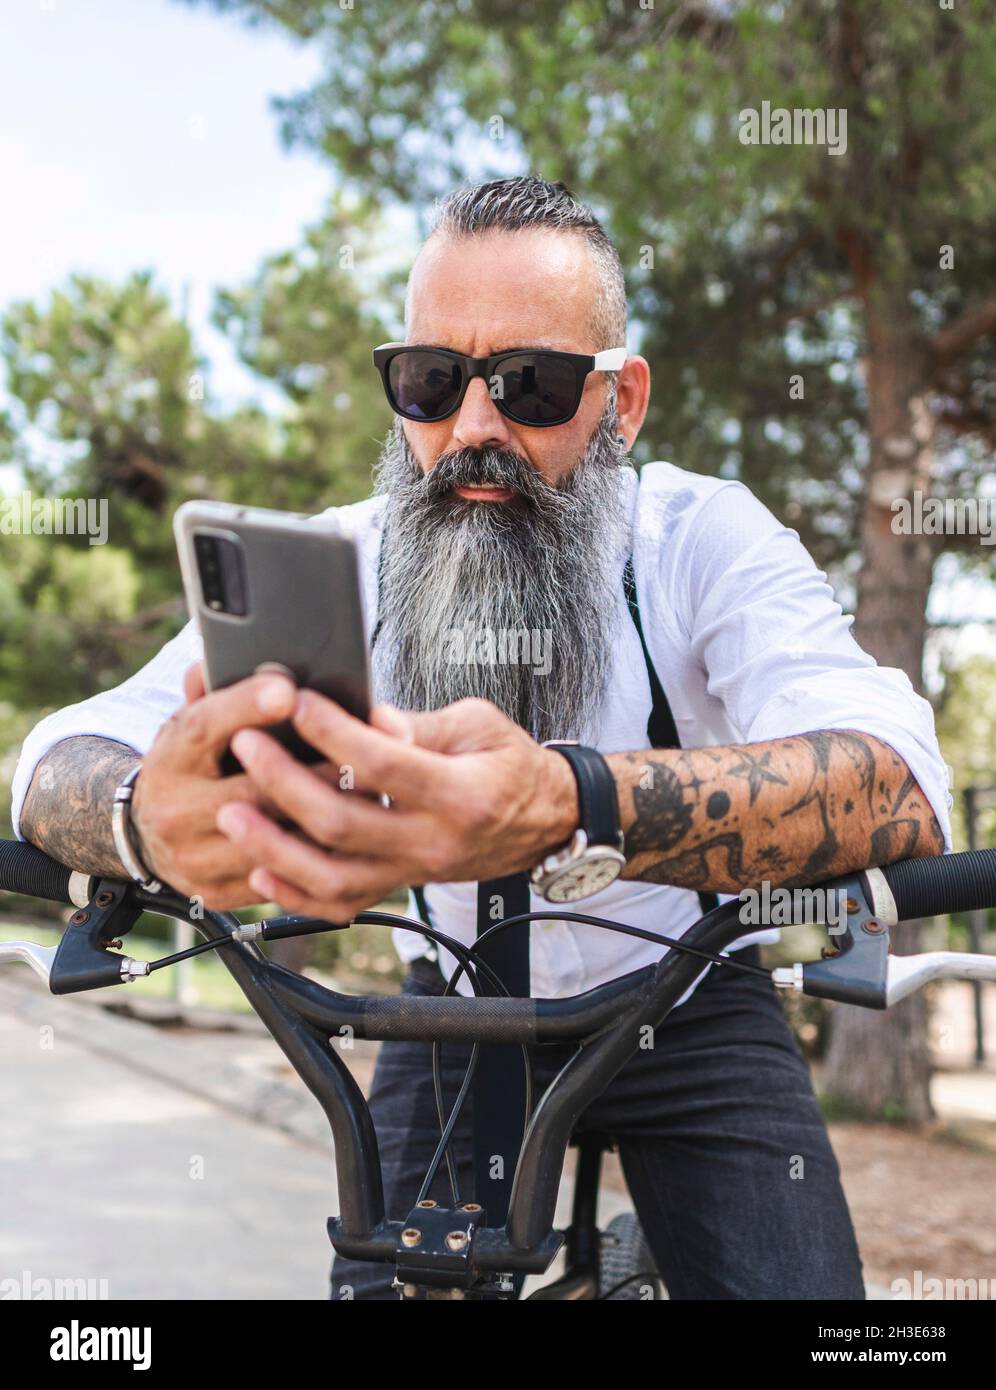 Bearded male in sunglasses and white shirt browsing on smartphone while sitting on bicycle in park with trees Stock Photo